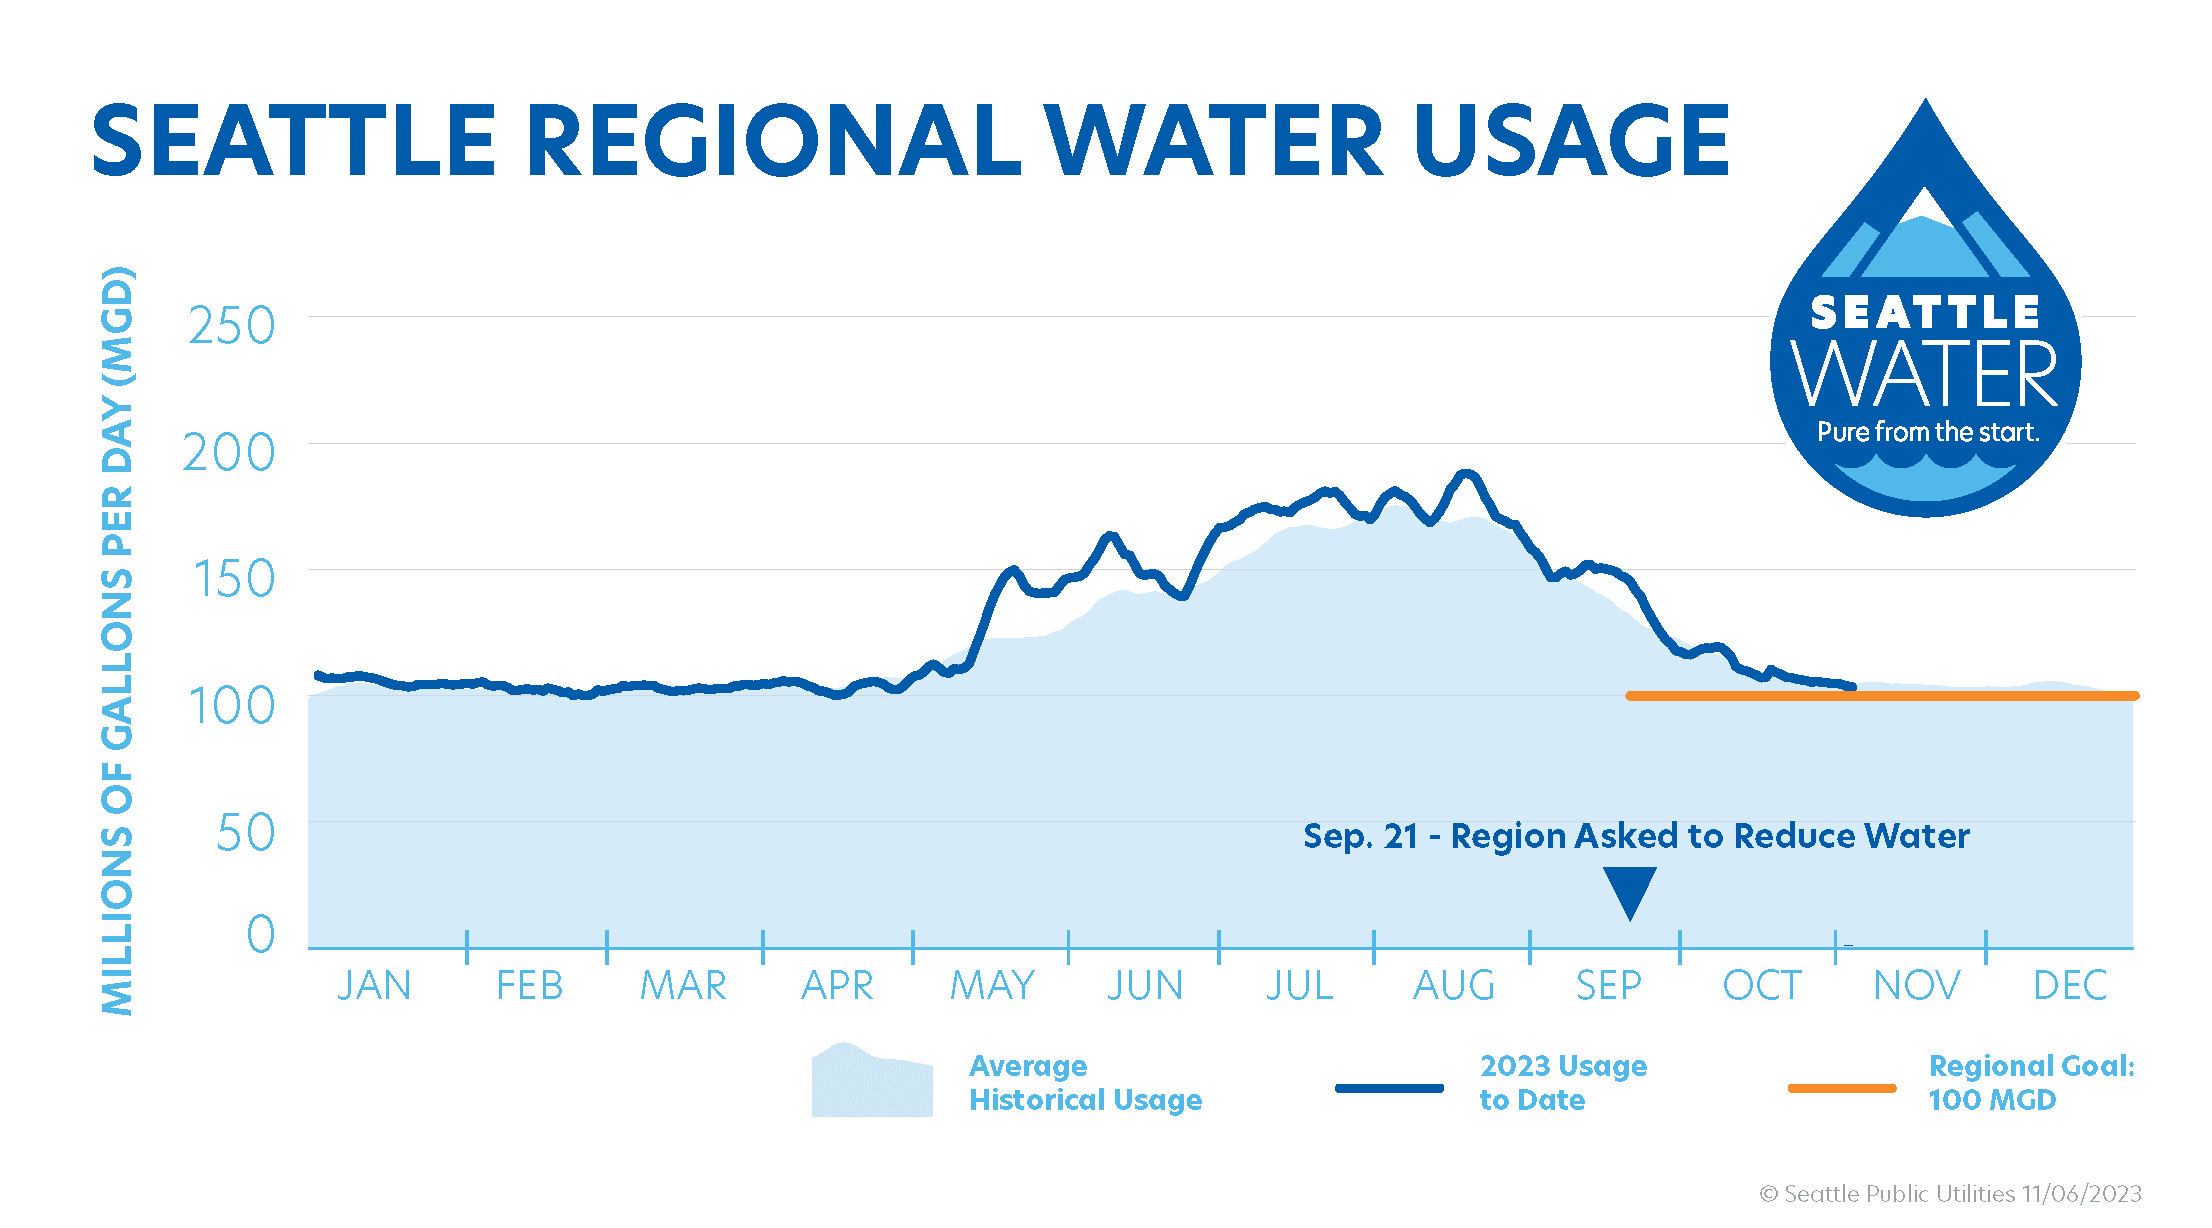 Graph showing Seattle regional water usage in millions of gallons per day (mgd) by month from January through December 2023. From January to mid-May the mgd hovered just above 100. From mid-May to late September the mgd  ranged from 150 to 200. Since  September 21, when the region was asked to reduce water usage, the mgd has steadily declined from 150 toward the goal of 100 mgd. As of early November the mgd is just above the goal at 104.